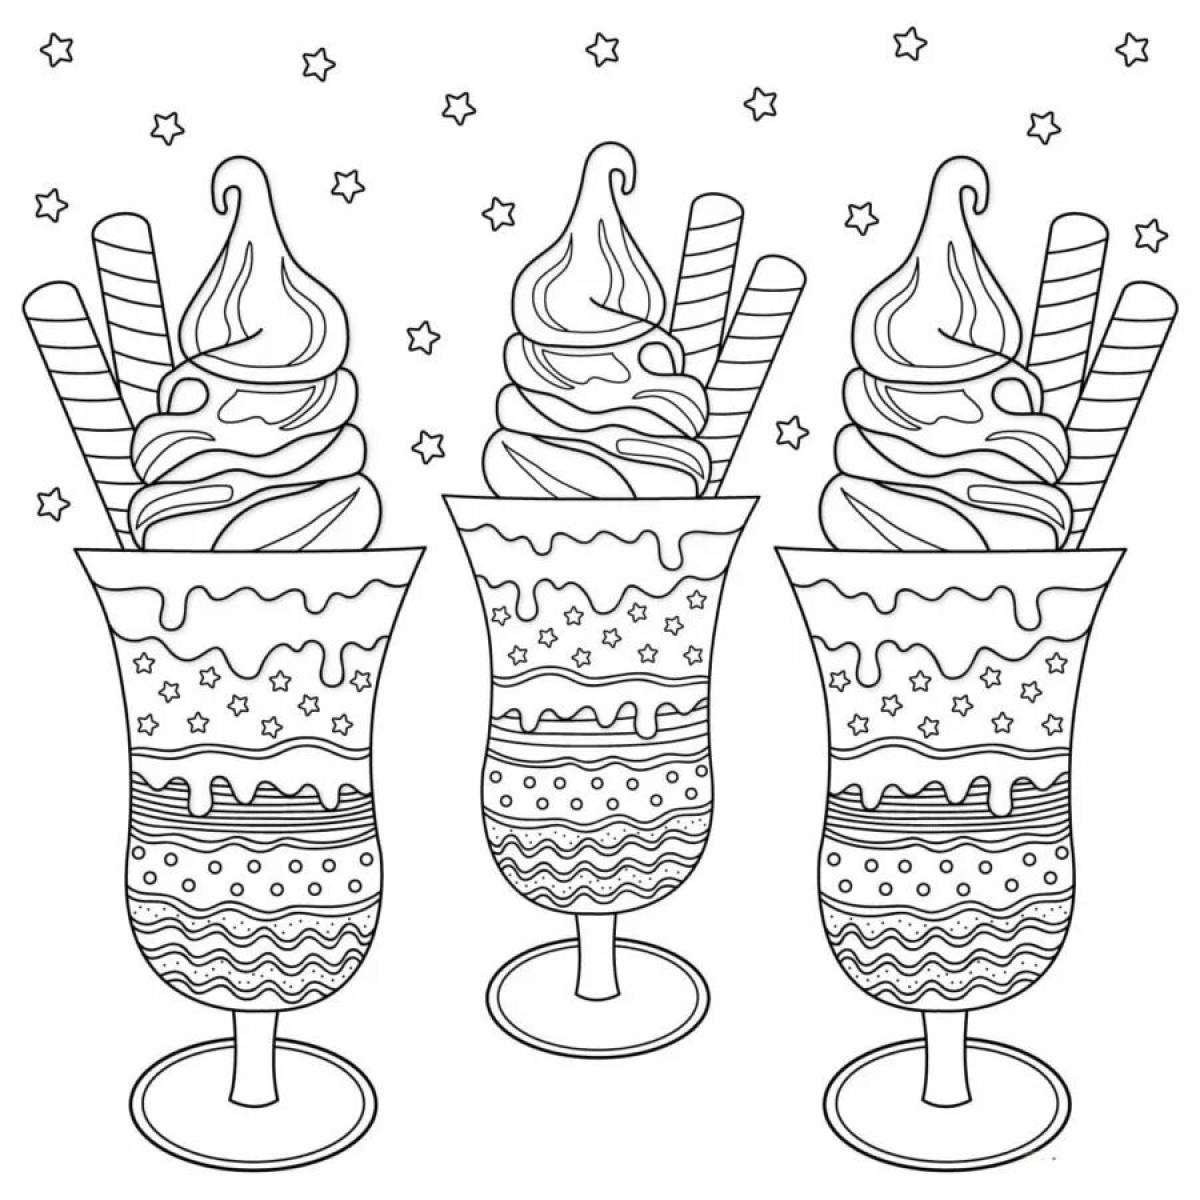 Dazzling coloring pages for markers